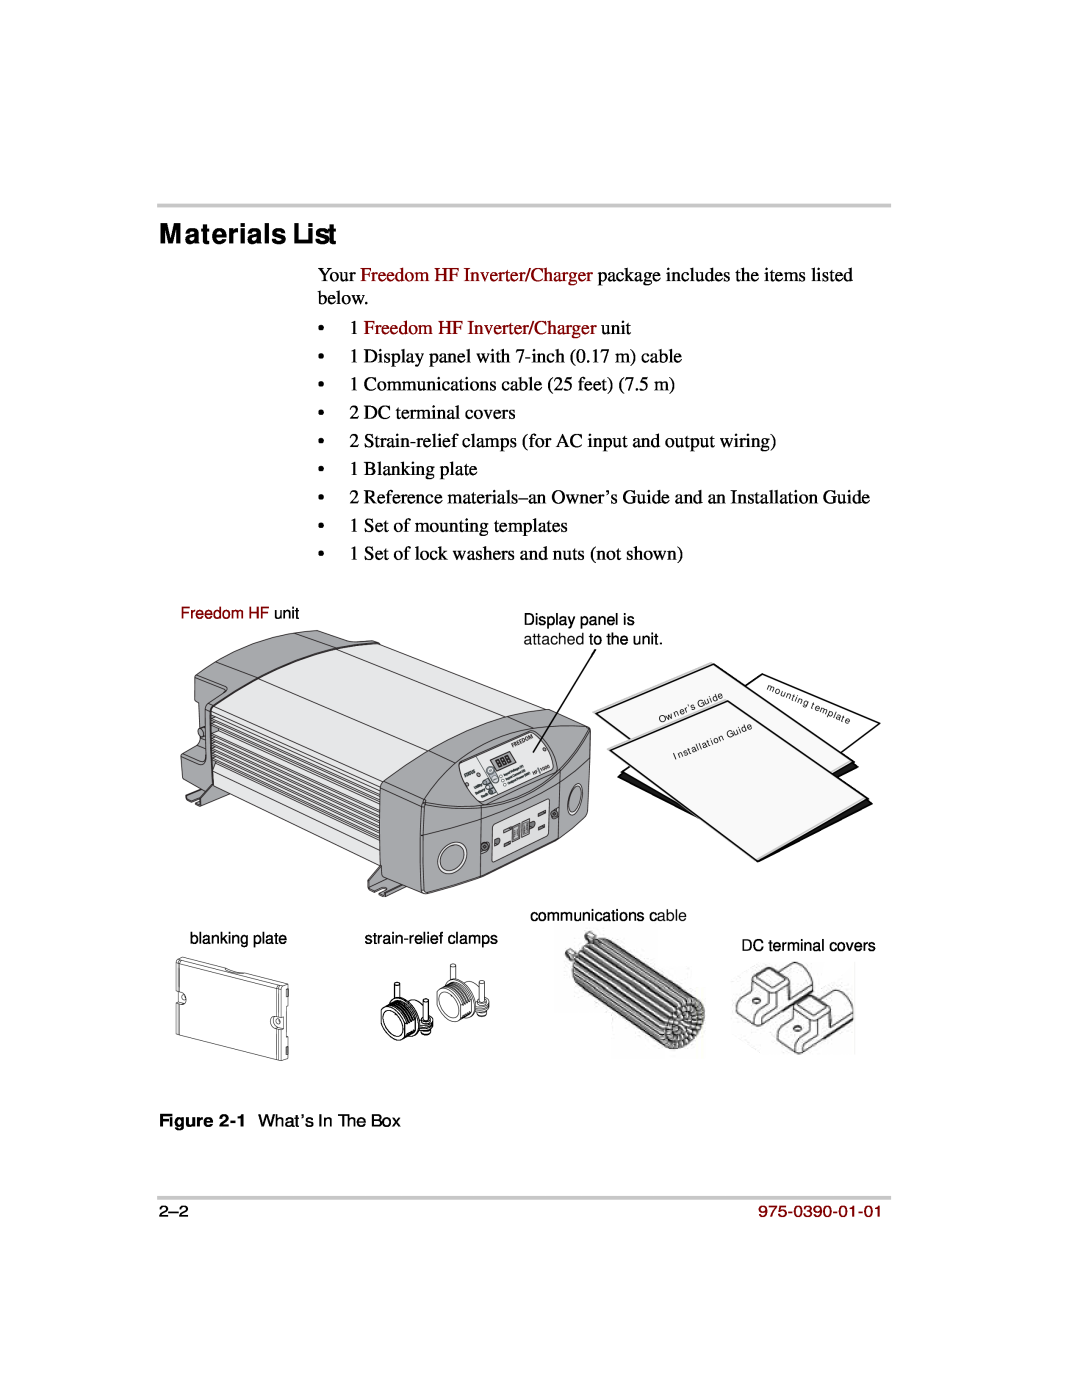 Xantrex Technology HF 1000, HF 1800 manual Materials List, Freedom HF Inverter/Charger unit 